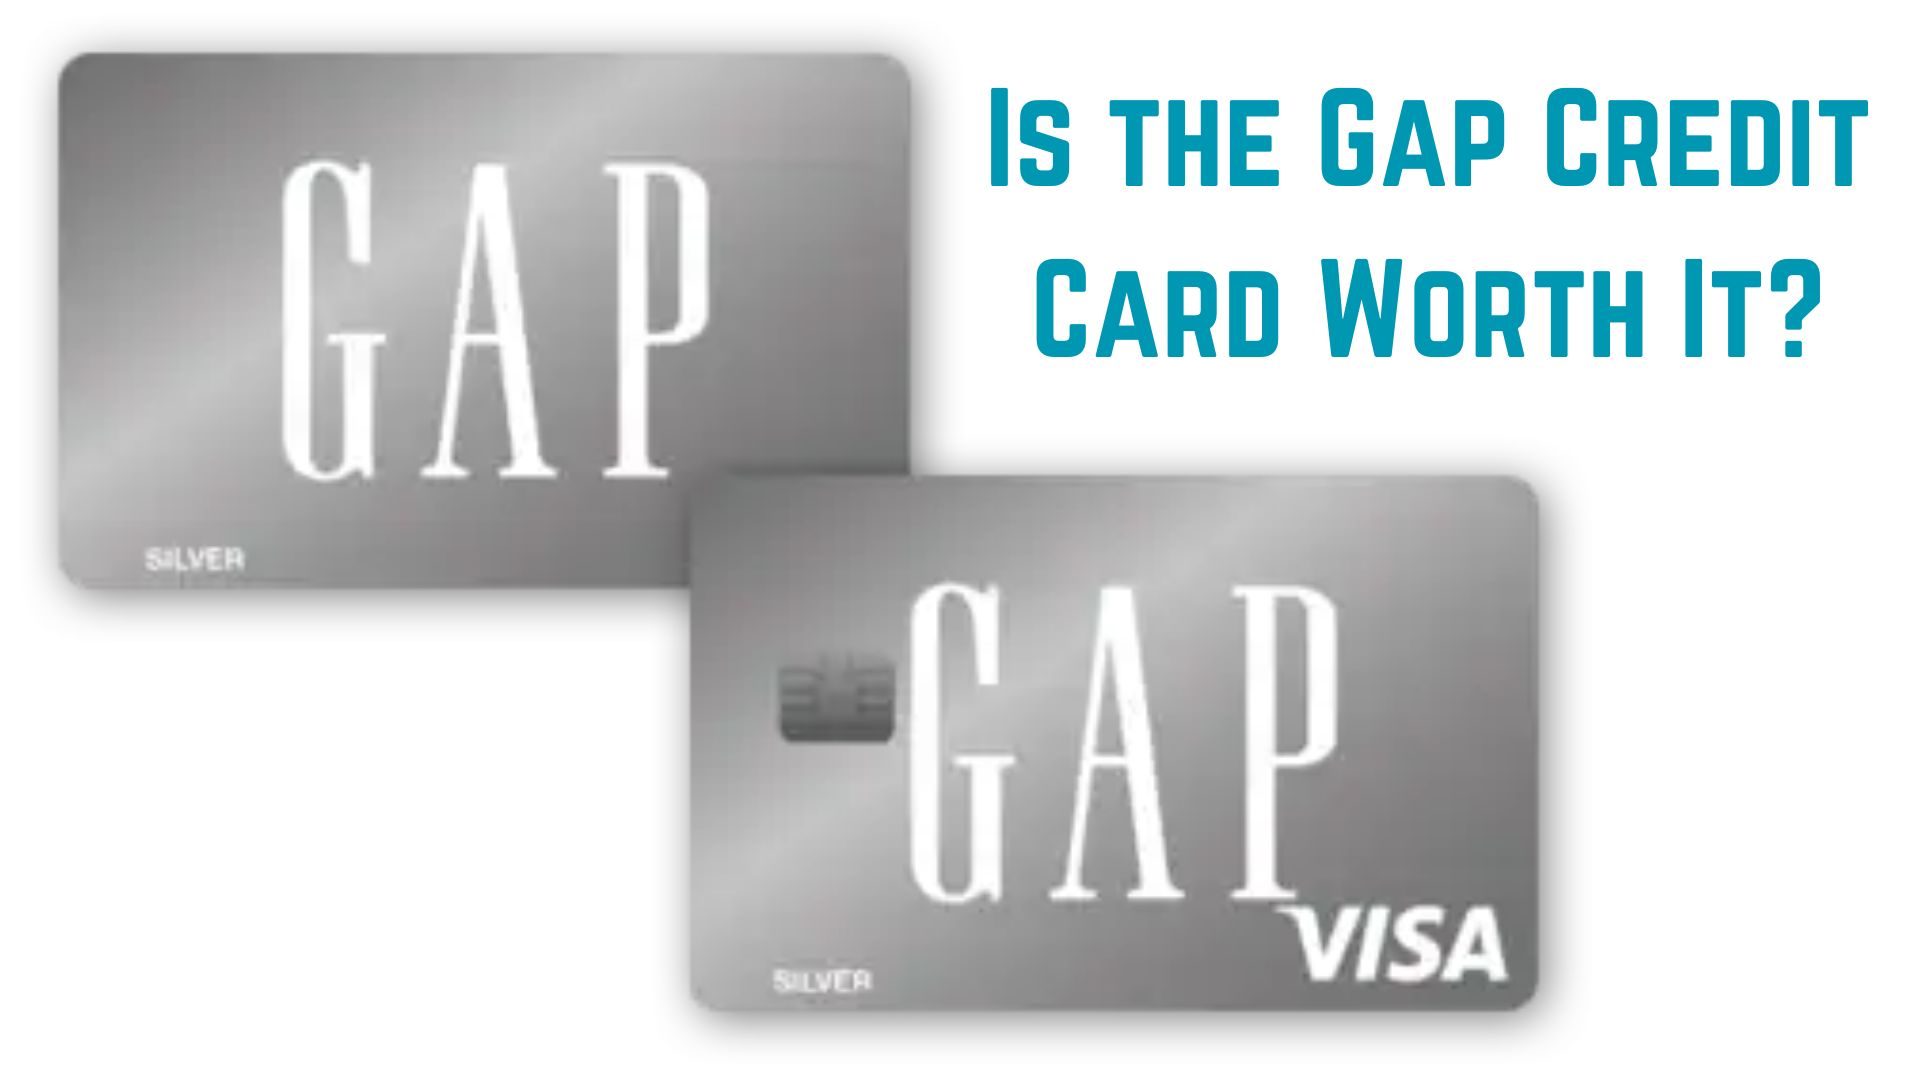 Is the Gap Credit Card Worth It?